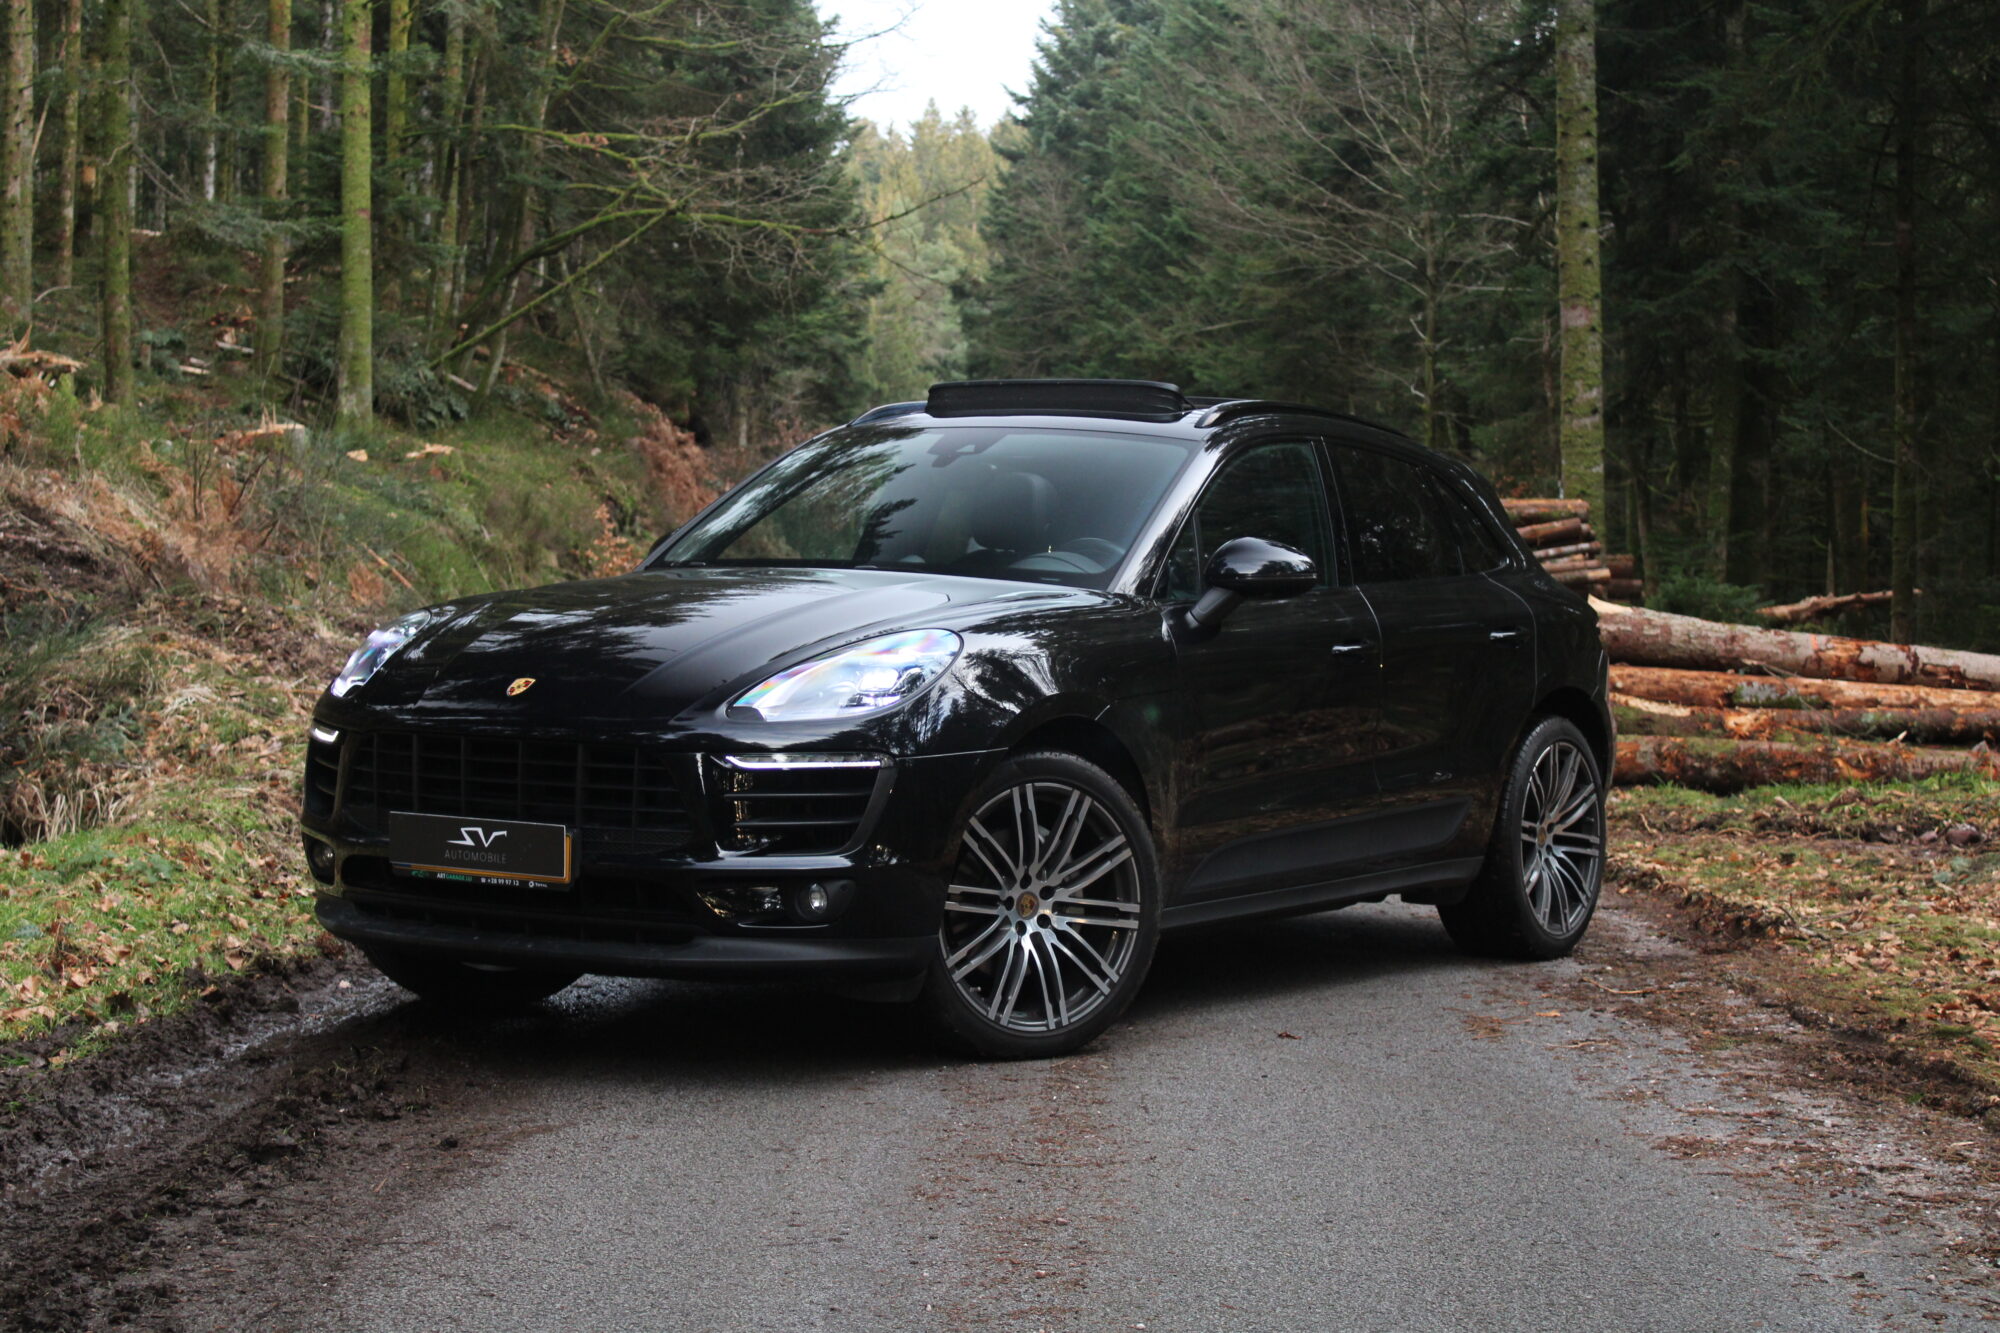 sv automobile macan lux img 6989 09